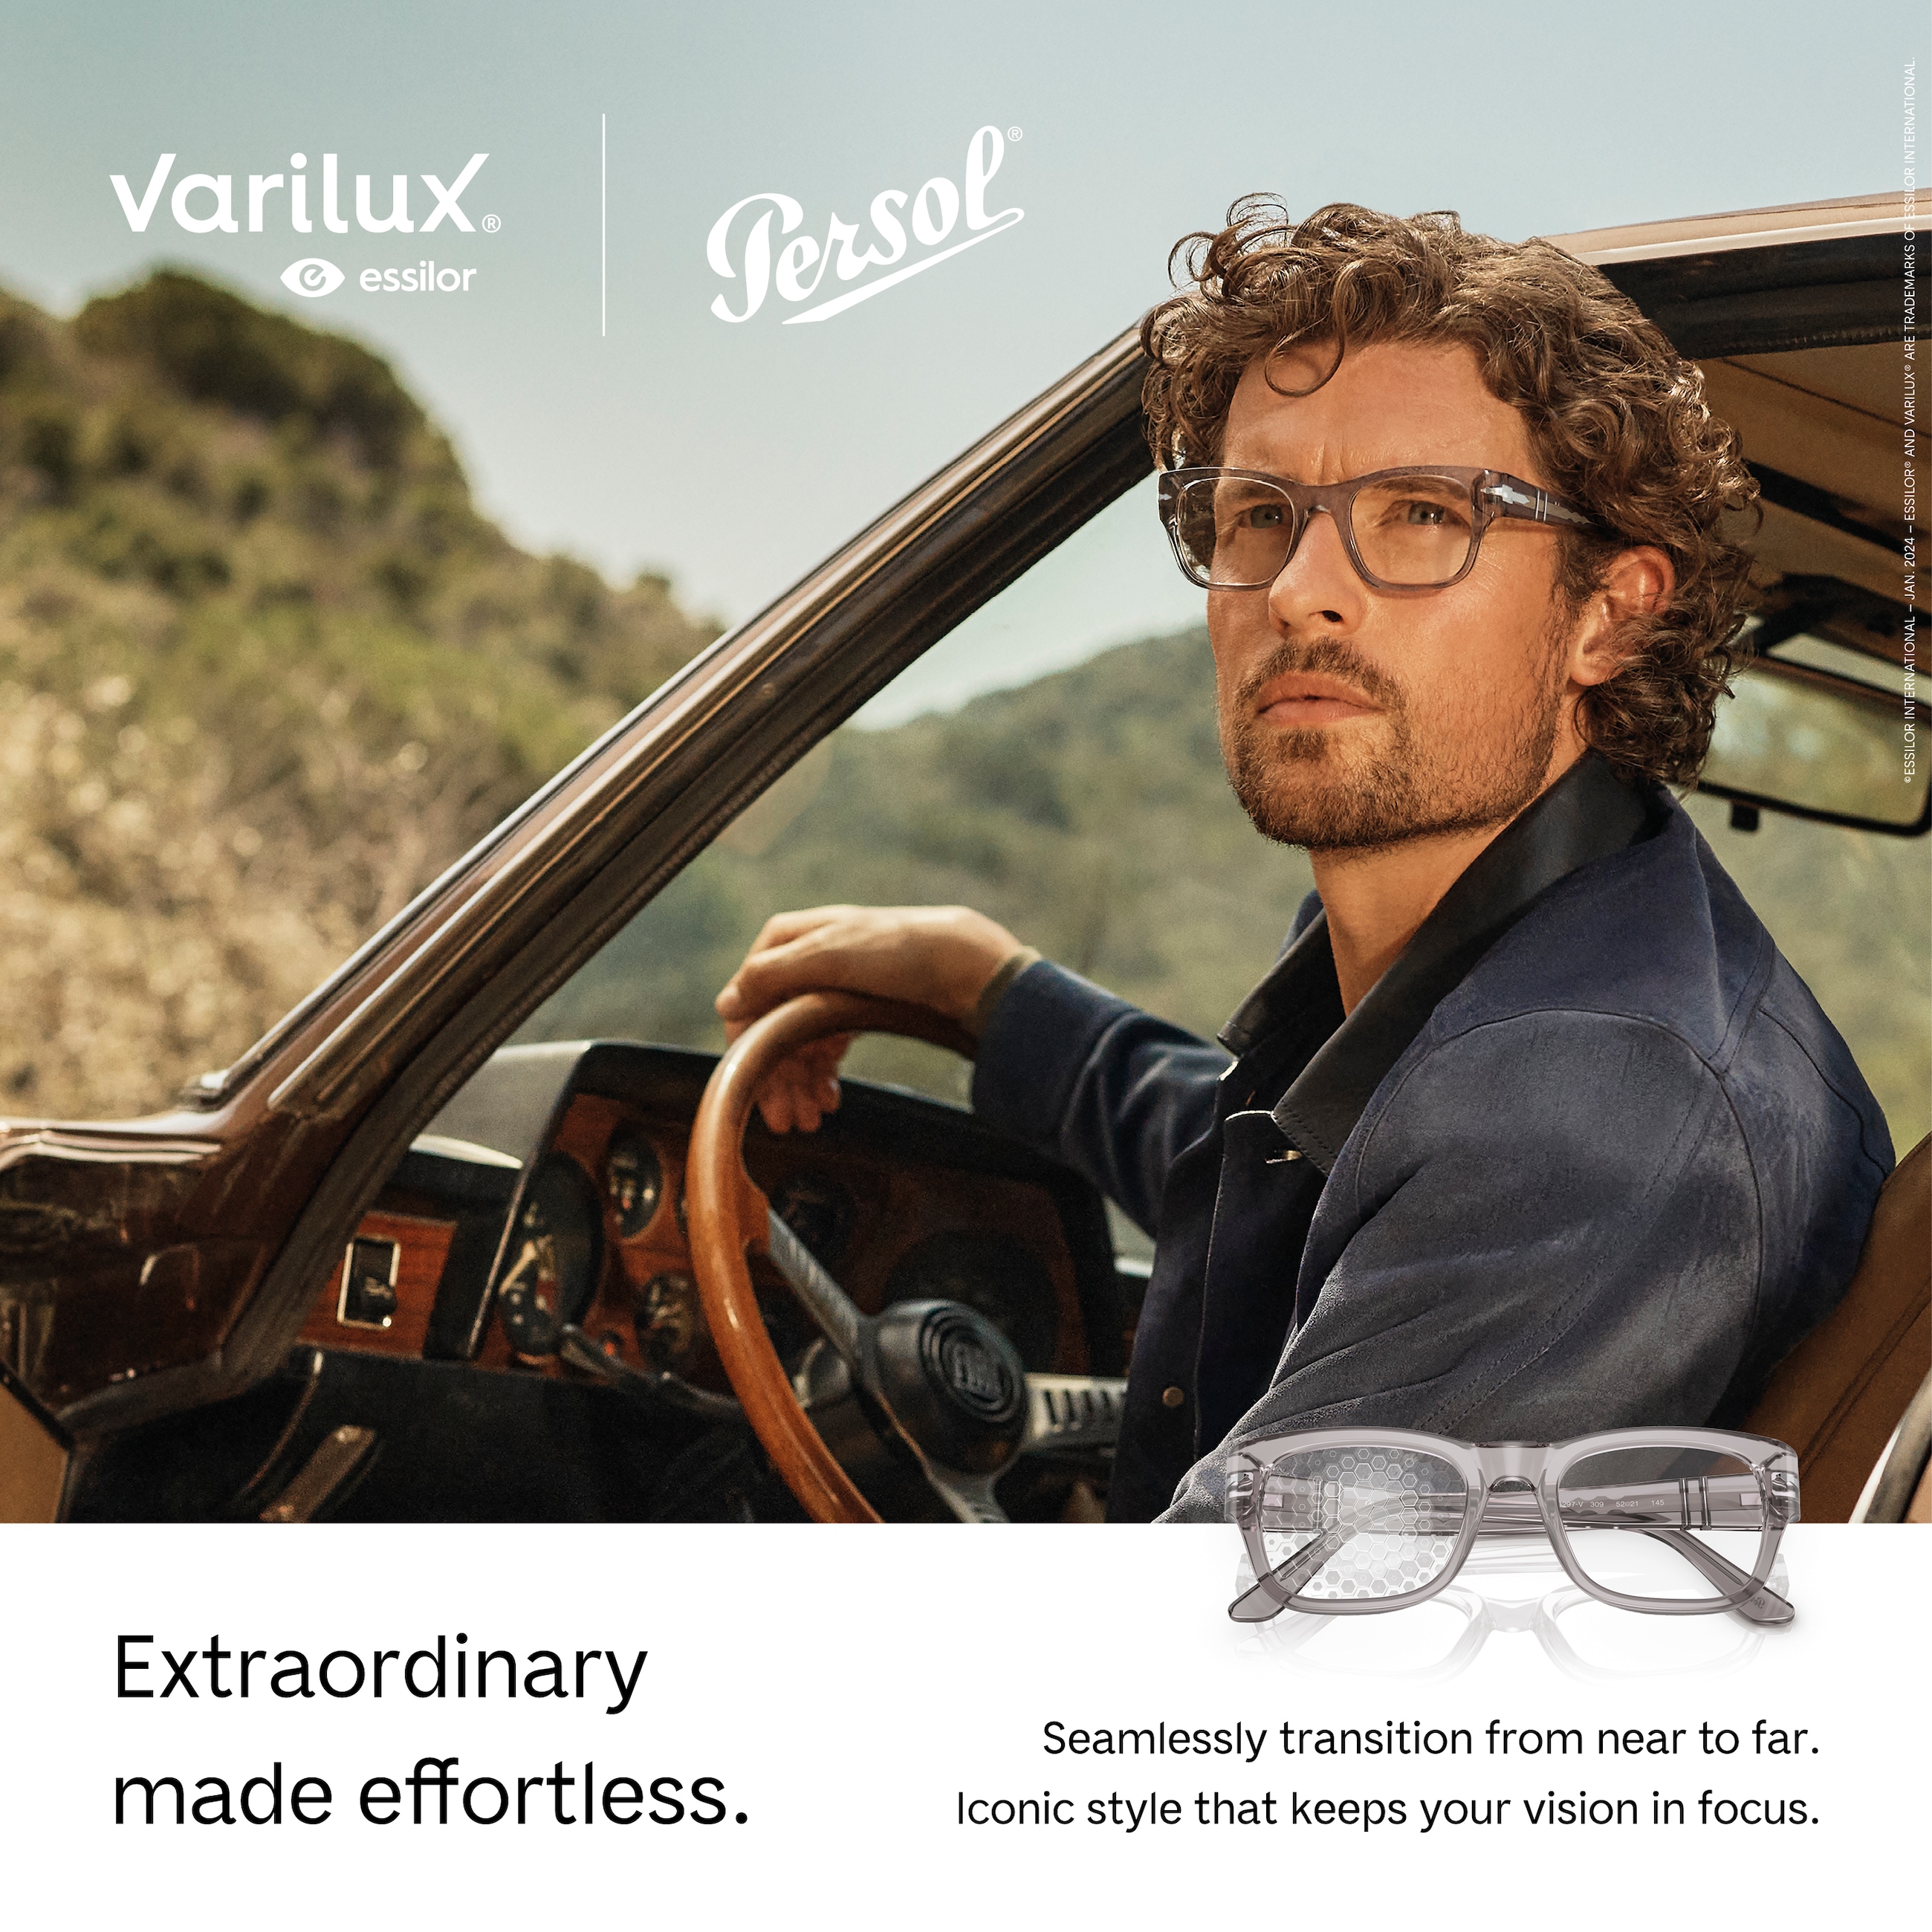 Solaris Sunglasses ME - Did you know that your children's eyes need extra  protection? VEX introducing the new Crizal Prevencia lenses from Essilor  for kids. | Facebook